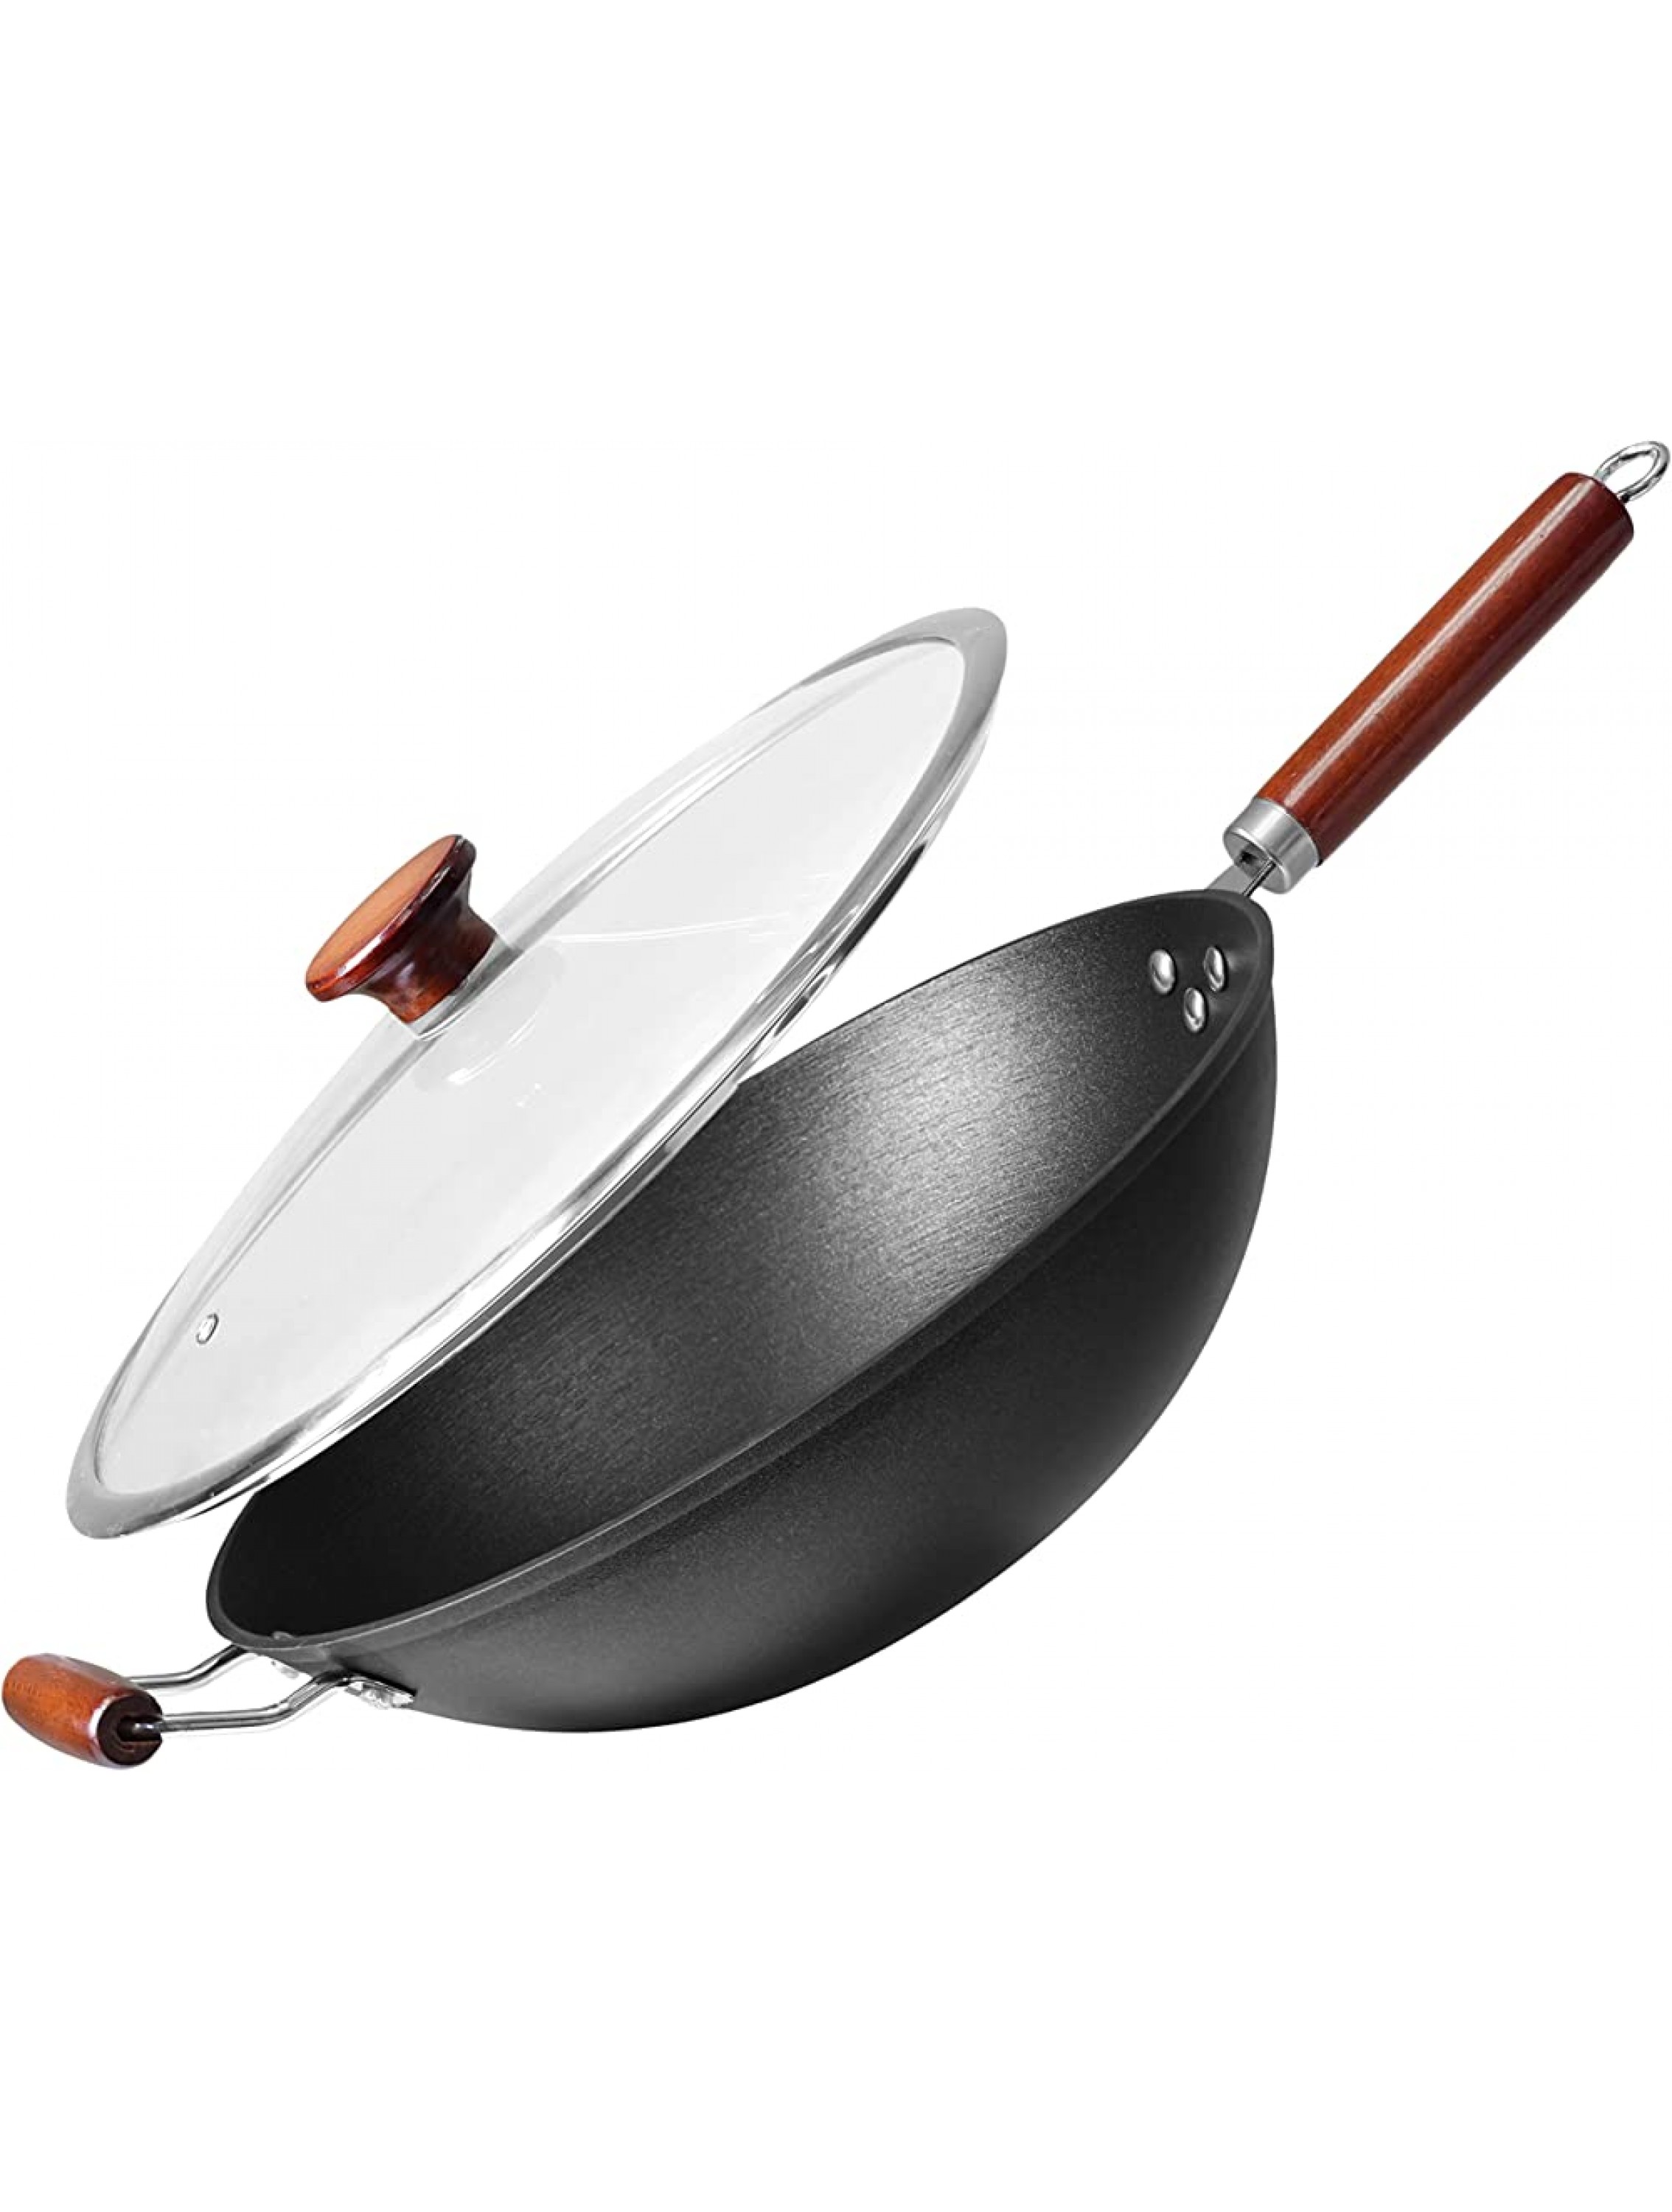 Light weight Cast Iron Wok Stir Fry Pan Wooden Handle with Glass lid 14 Inch chef’s pan pre-seasoned nonstick commercial and household for Chinese Japanese and others Cooking - B4UALS9LM